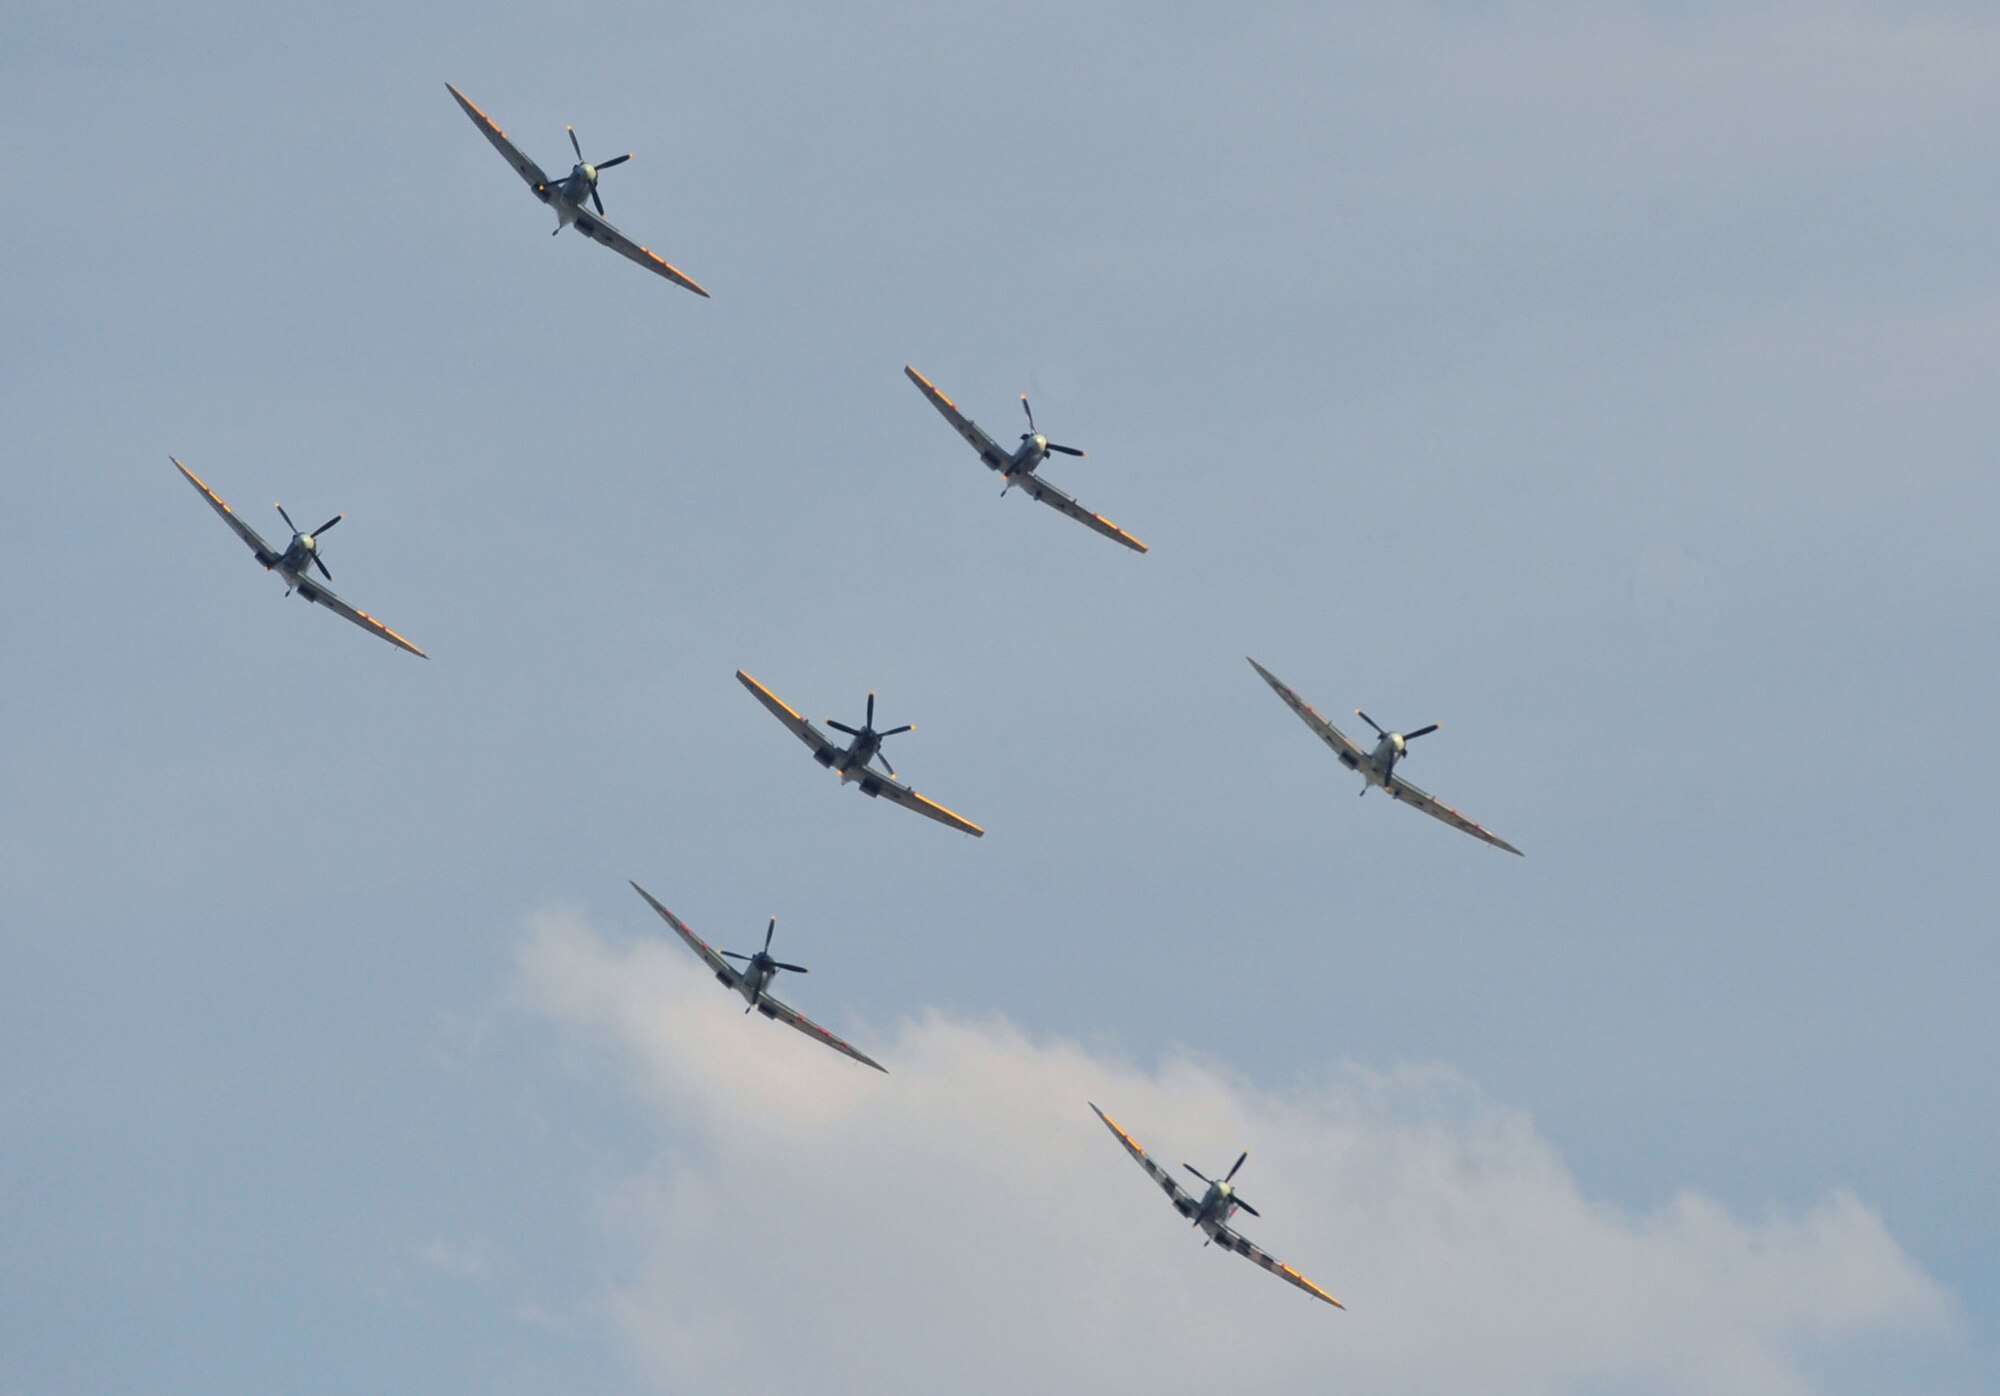 A formation of Supermarine Spitfires entertains an audience during the Duxford Air Show Sept. 3, 2011 in Duxford village in Cambridgeshire, England. Duxford was home of an airfield used by the U.S. Army Air Force during WWII to launch attacks on the axis powers. (U.S. Air Force photo by Senior Airman Marissa Tucker)